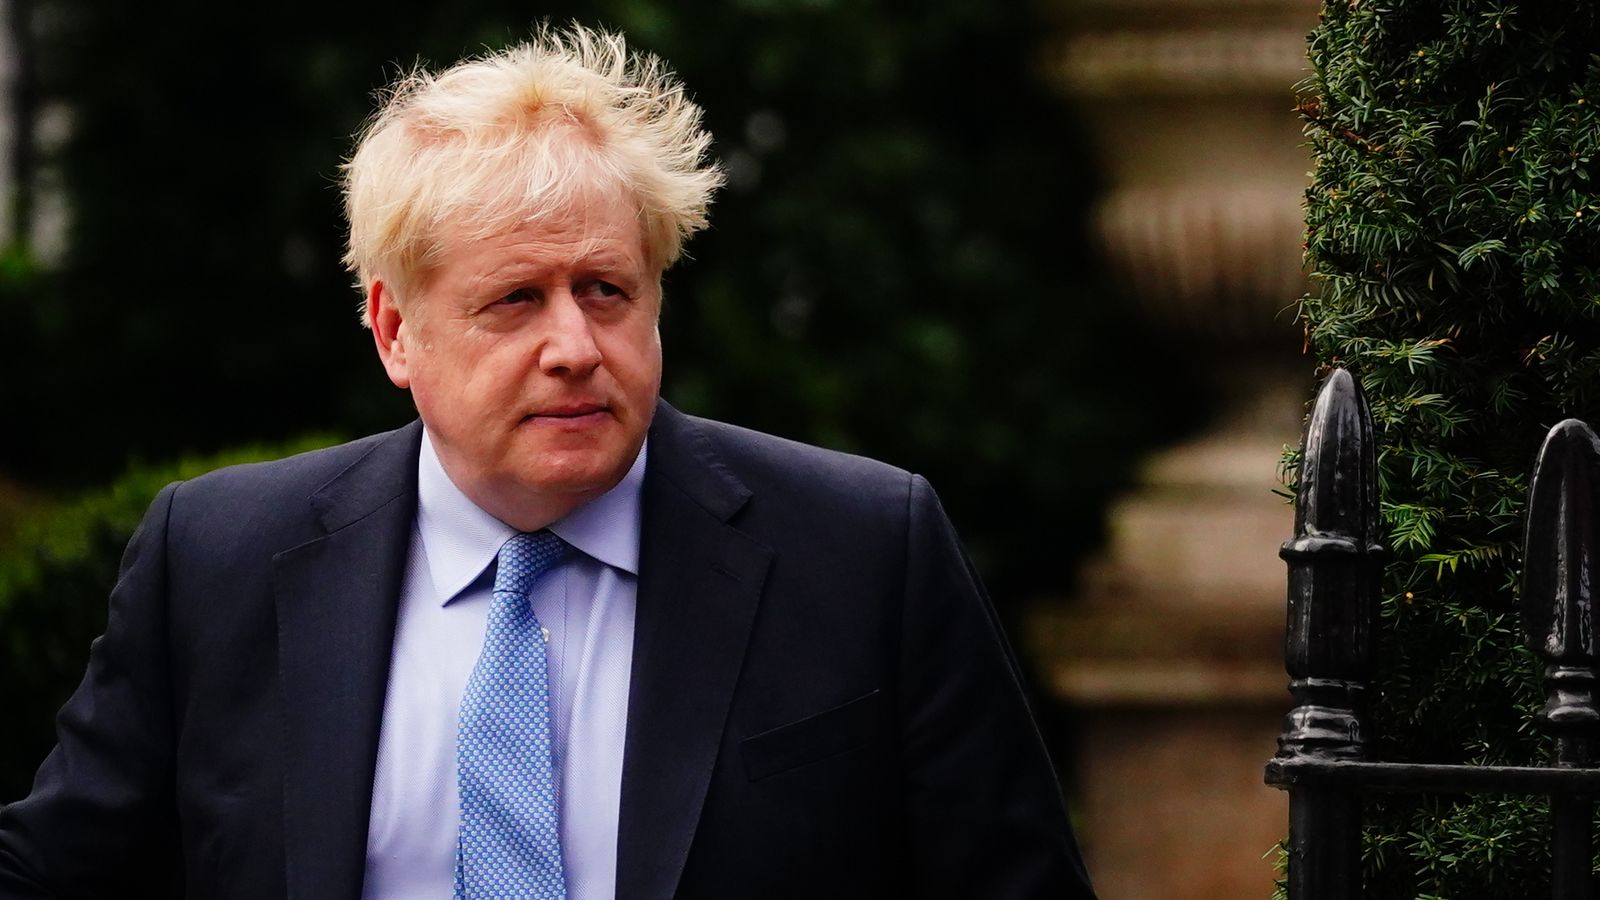 Boris Johnson vows 'Ill be back' as ex-prime minister formally resigns as MP